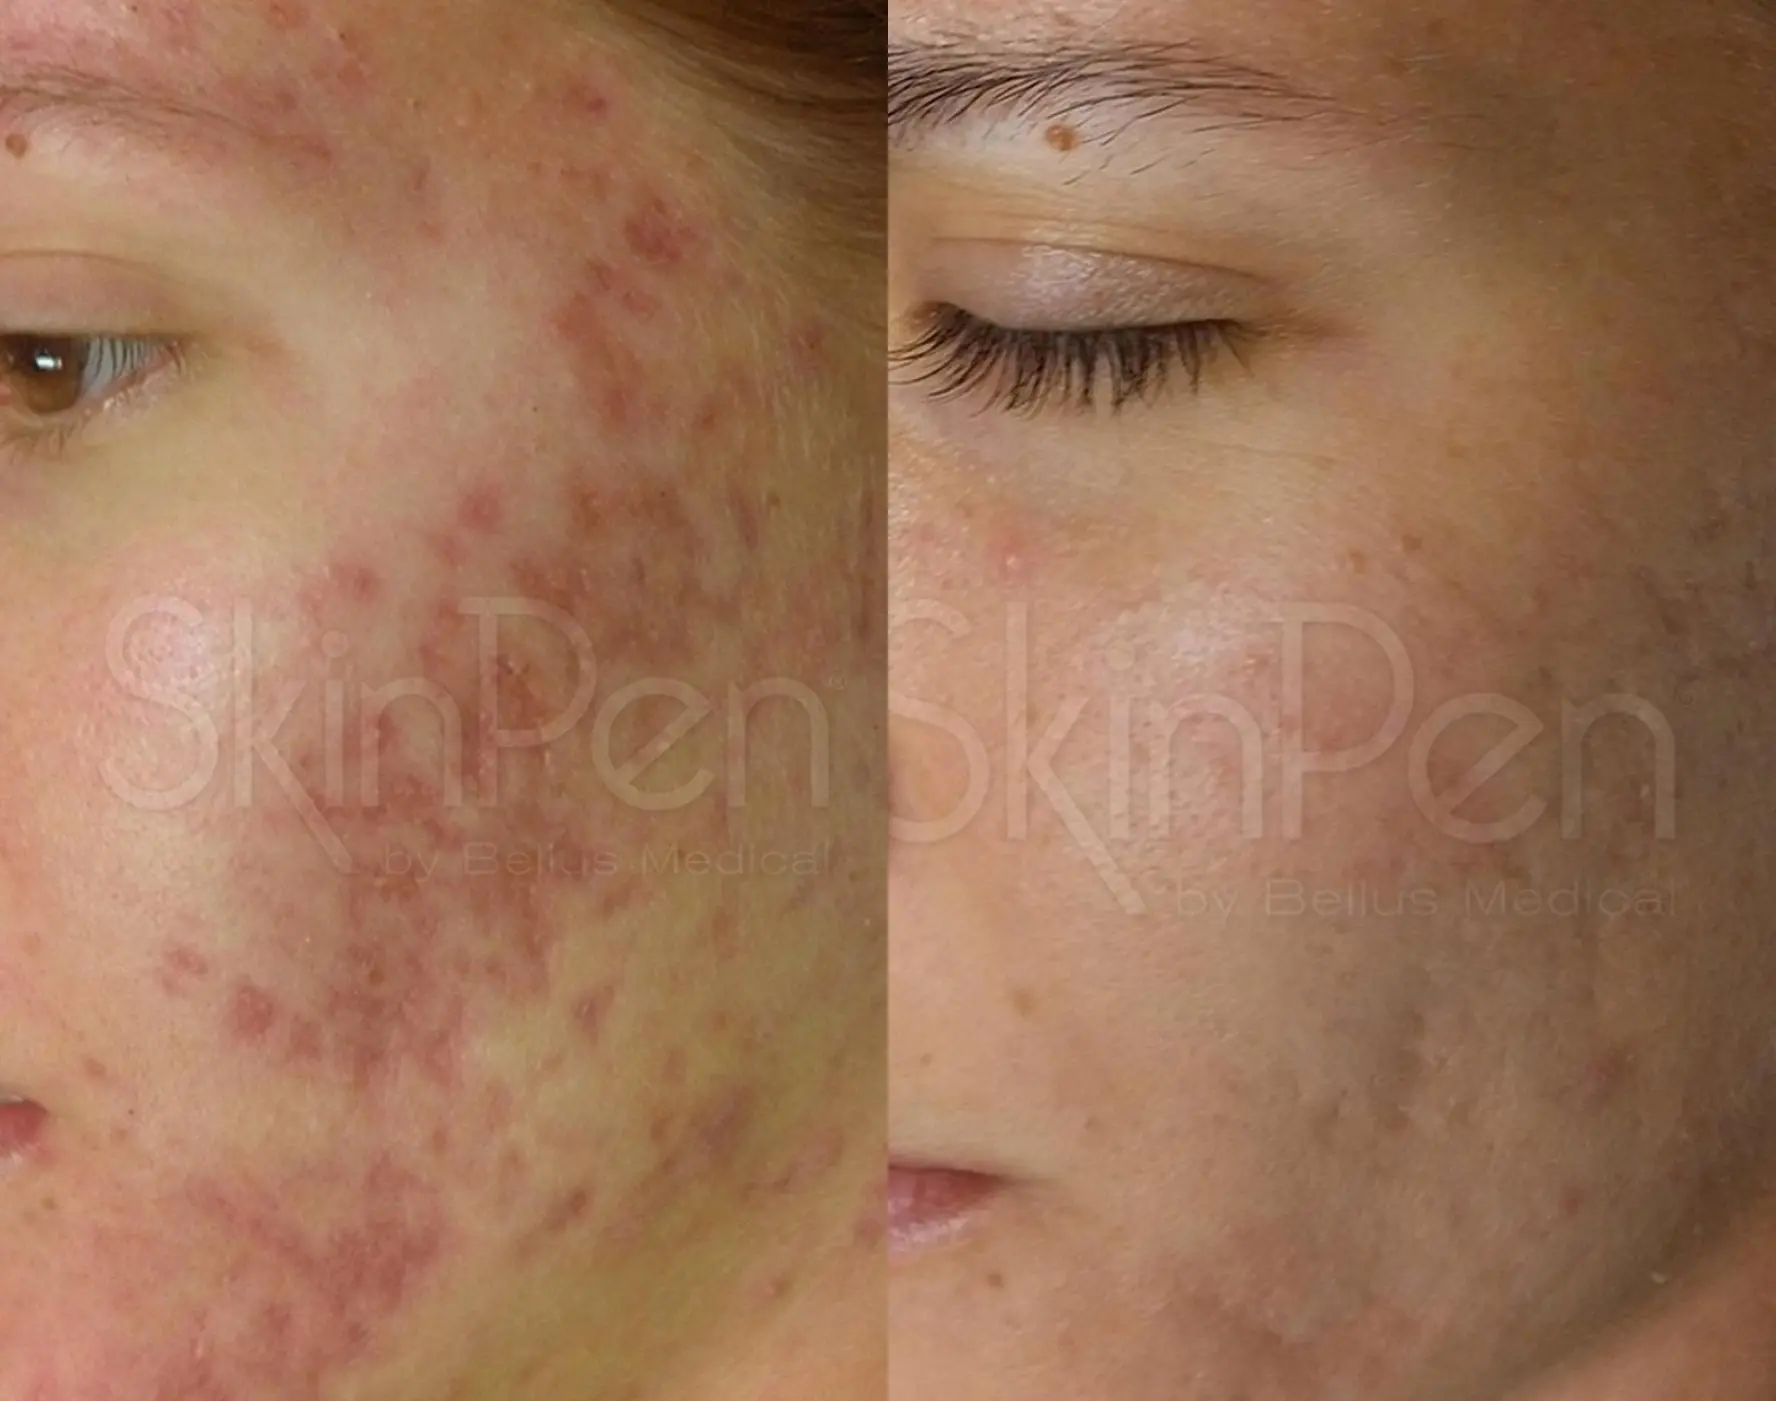 SkinPen®: Patient 2 - Before and After 1